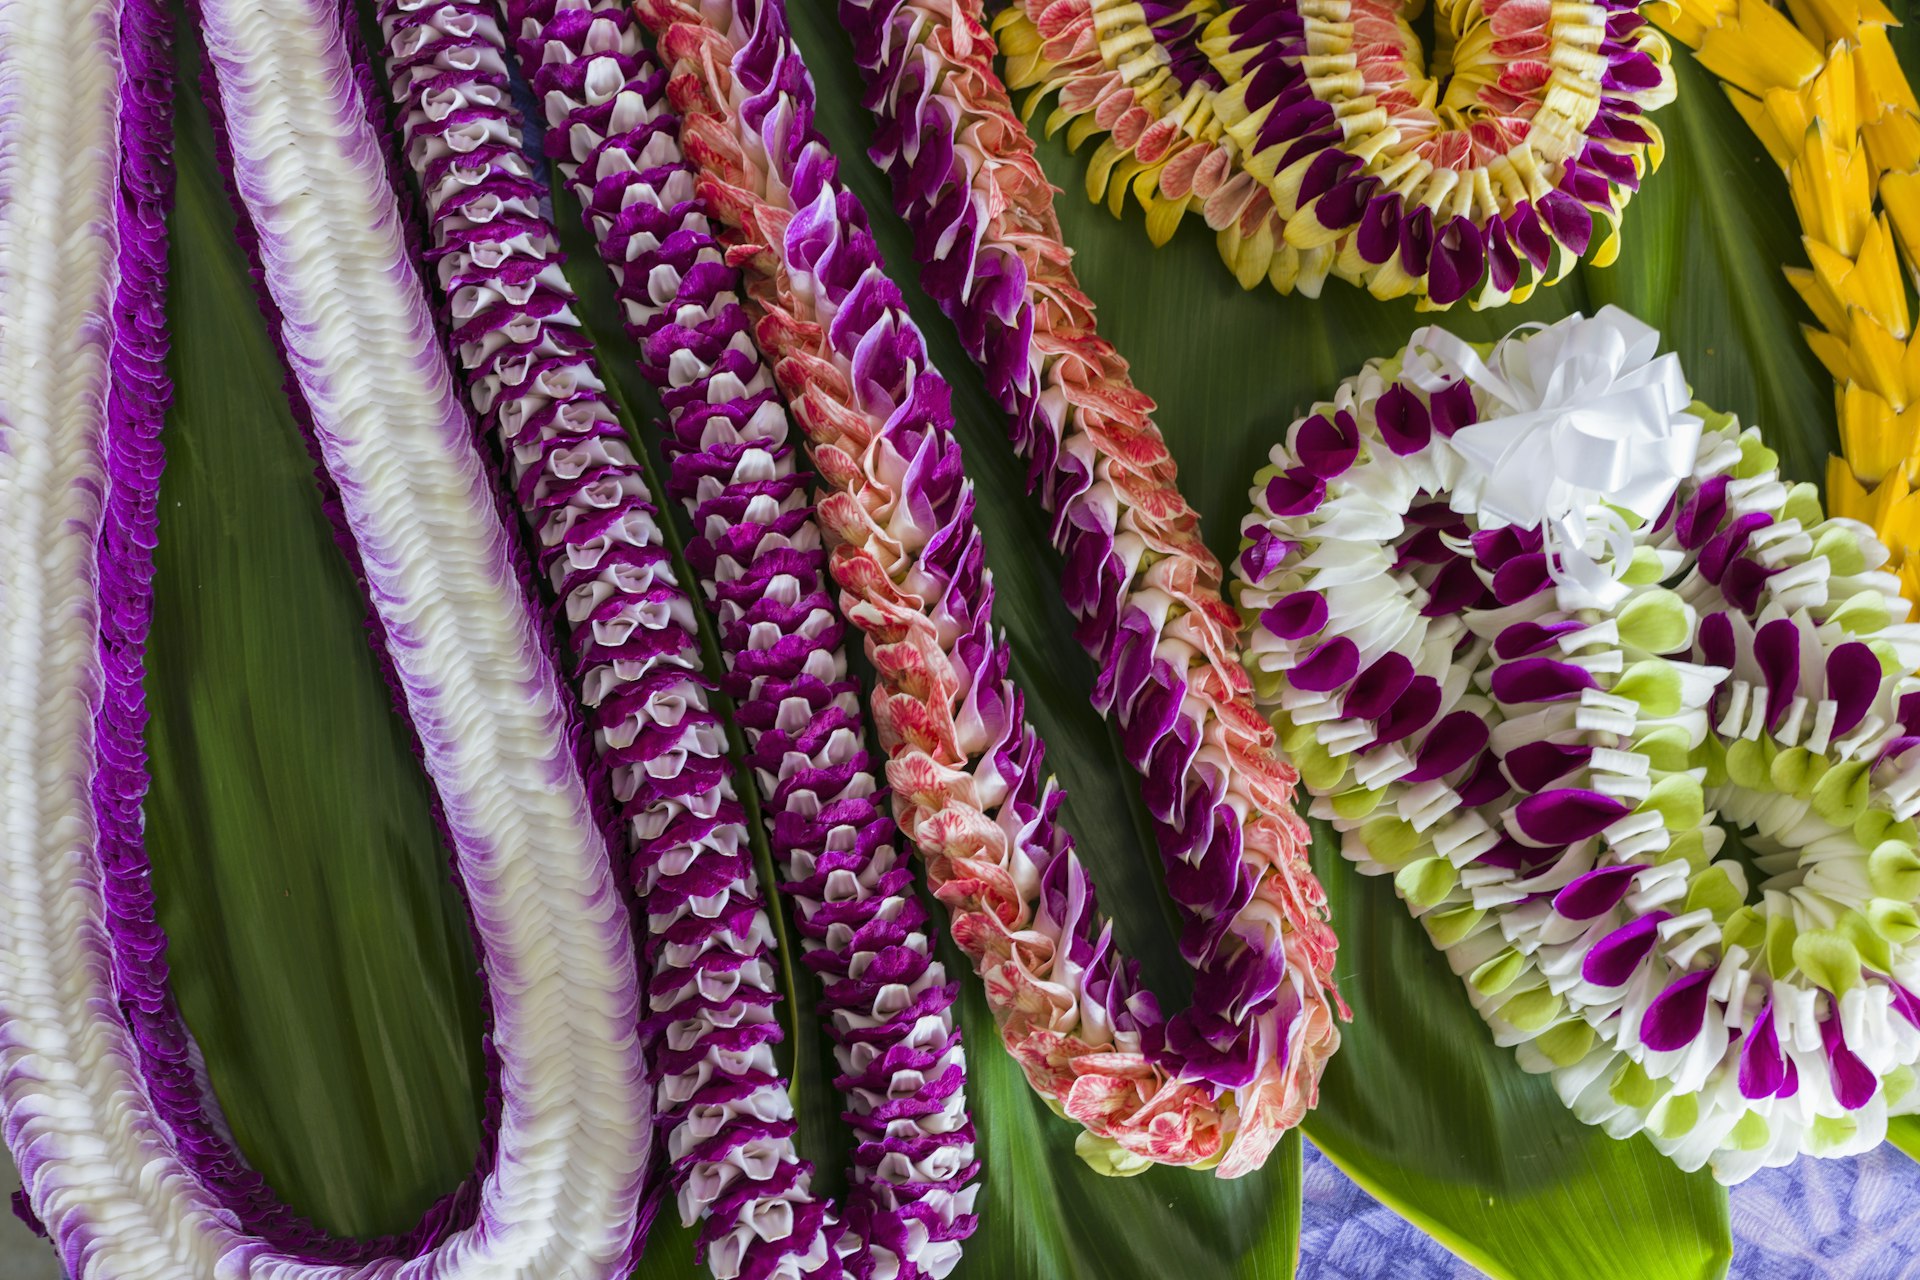 Flower lei for sale at Merrie Monarch Festival in Hilo Hawaii